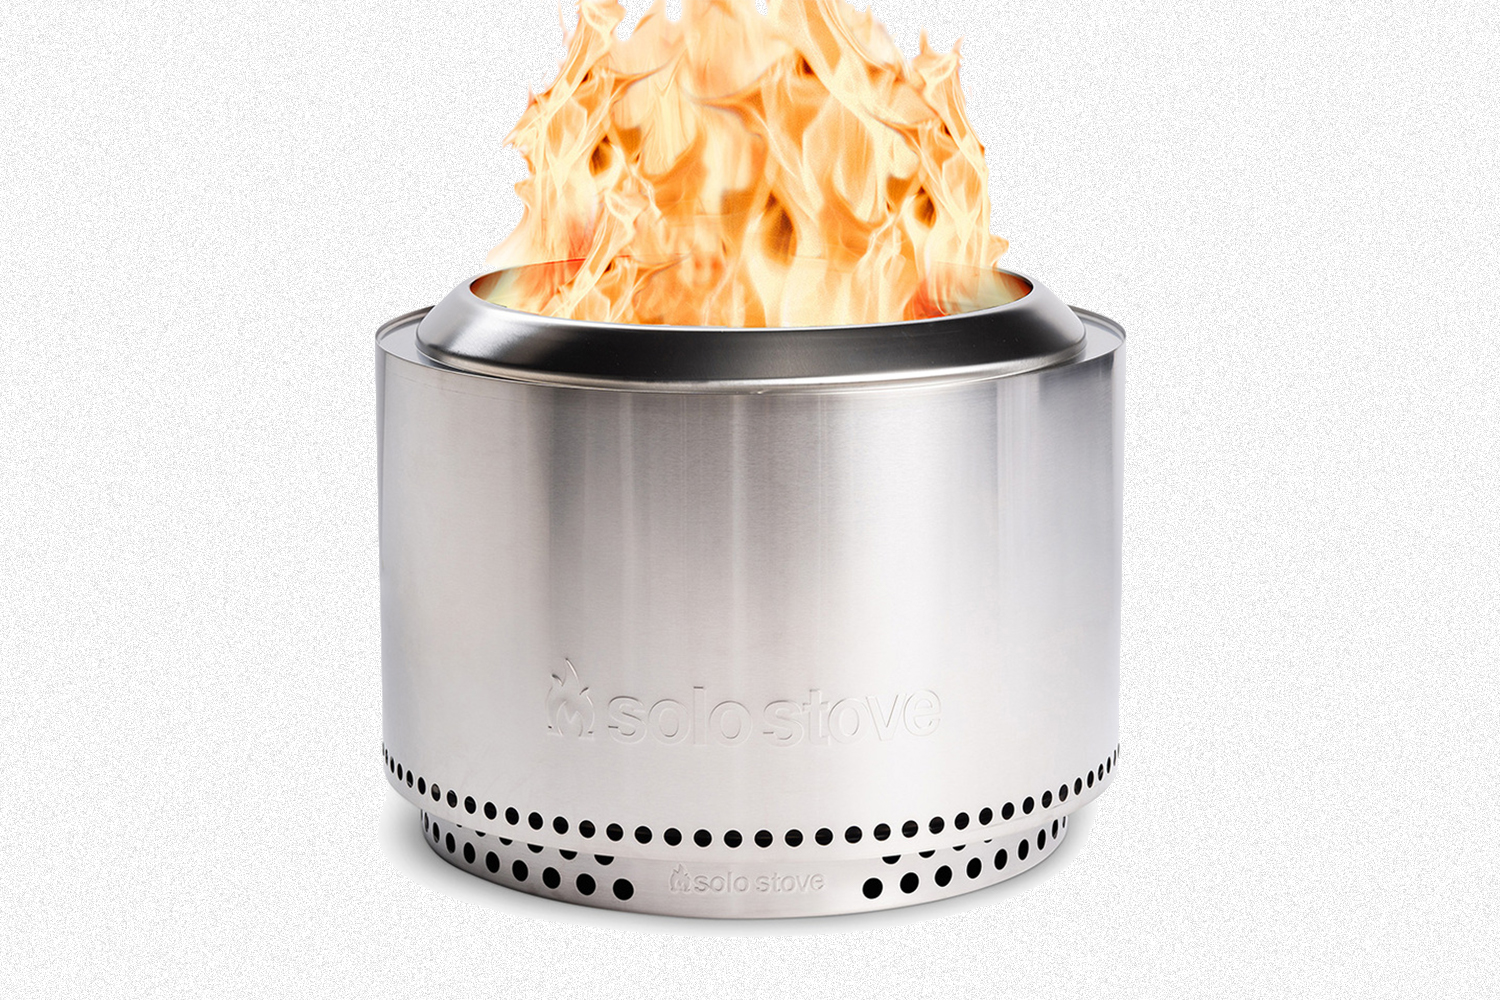 The Solo Stove Yukon fire pit and stand with a fire raging inside on a grey background. The stainless steel fire pit is on sale for a limited time.